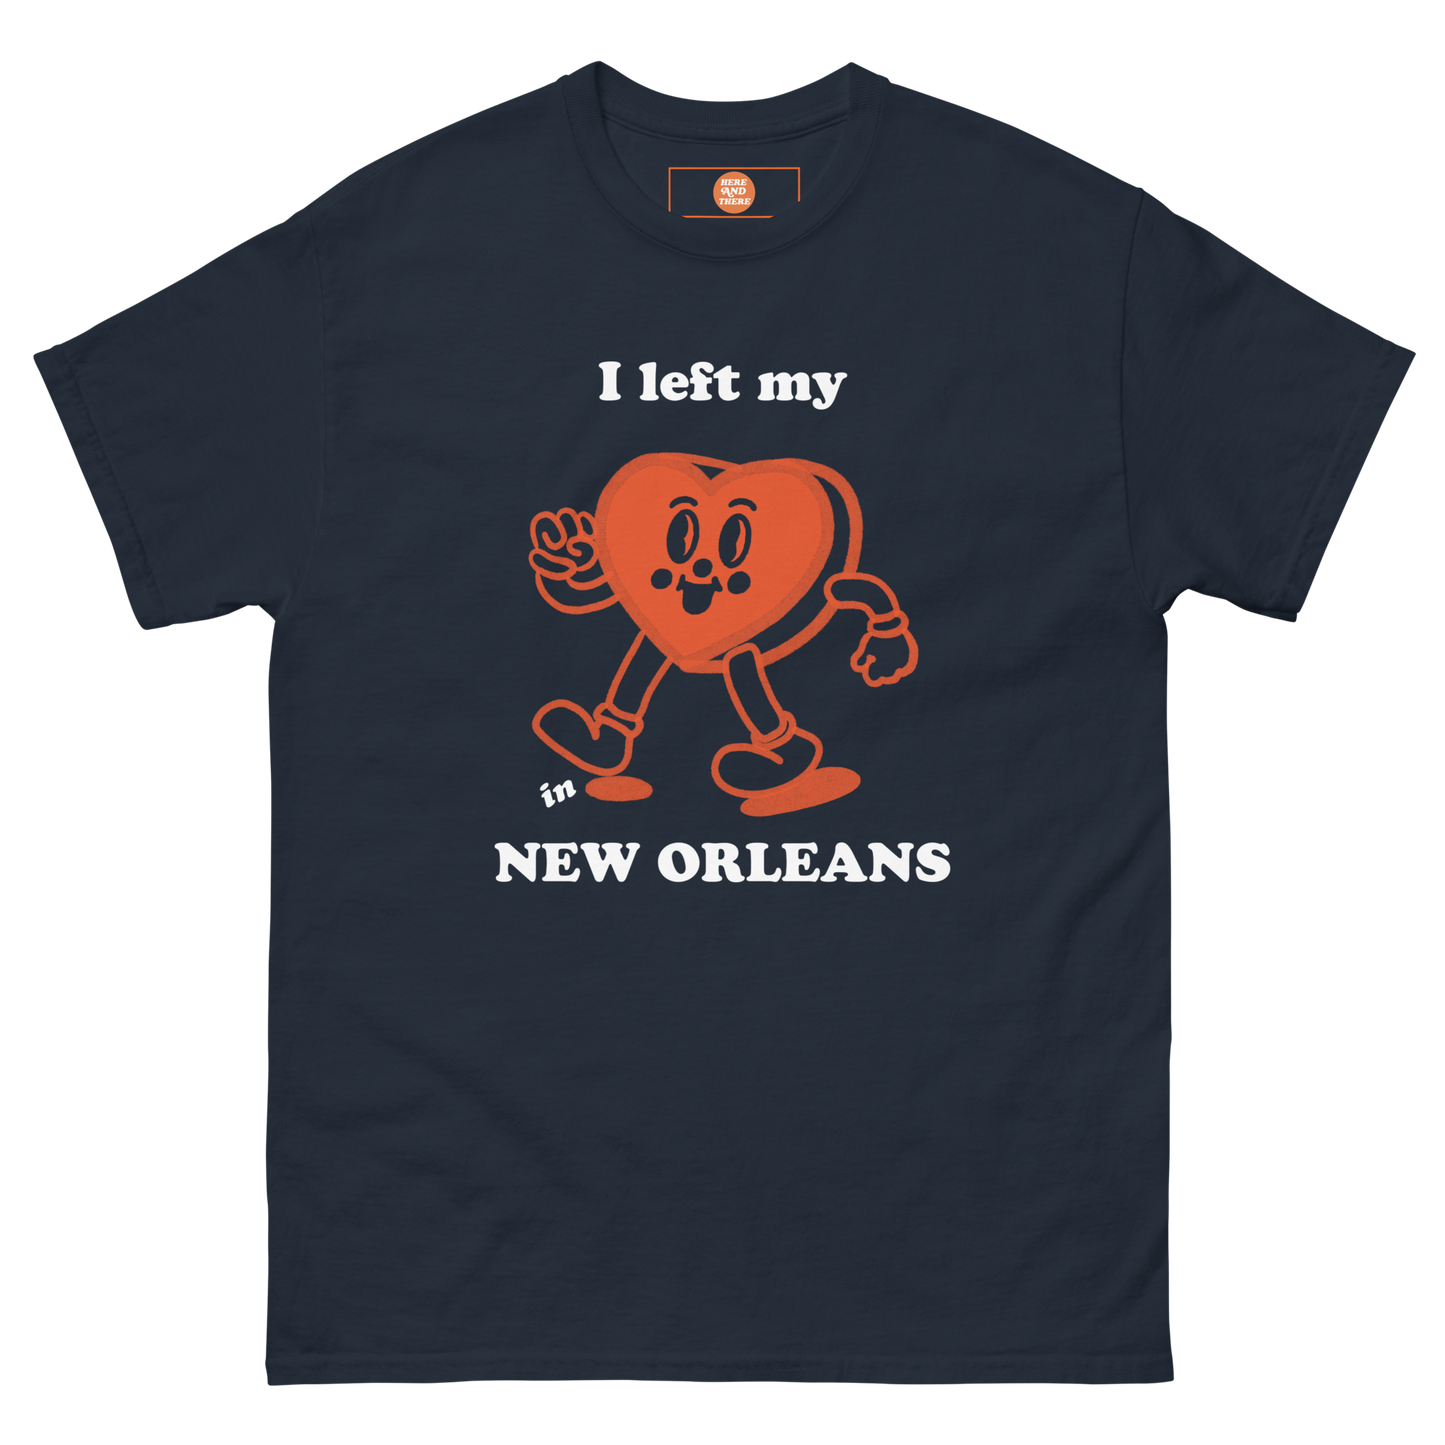 NEW ORLEANS + NAVY